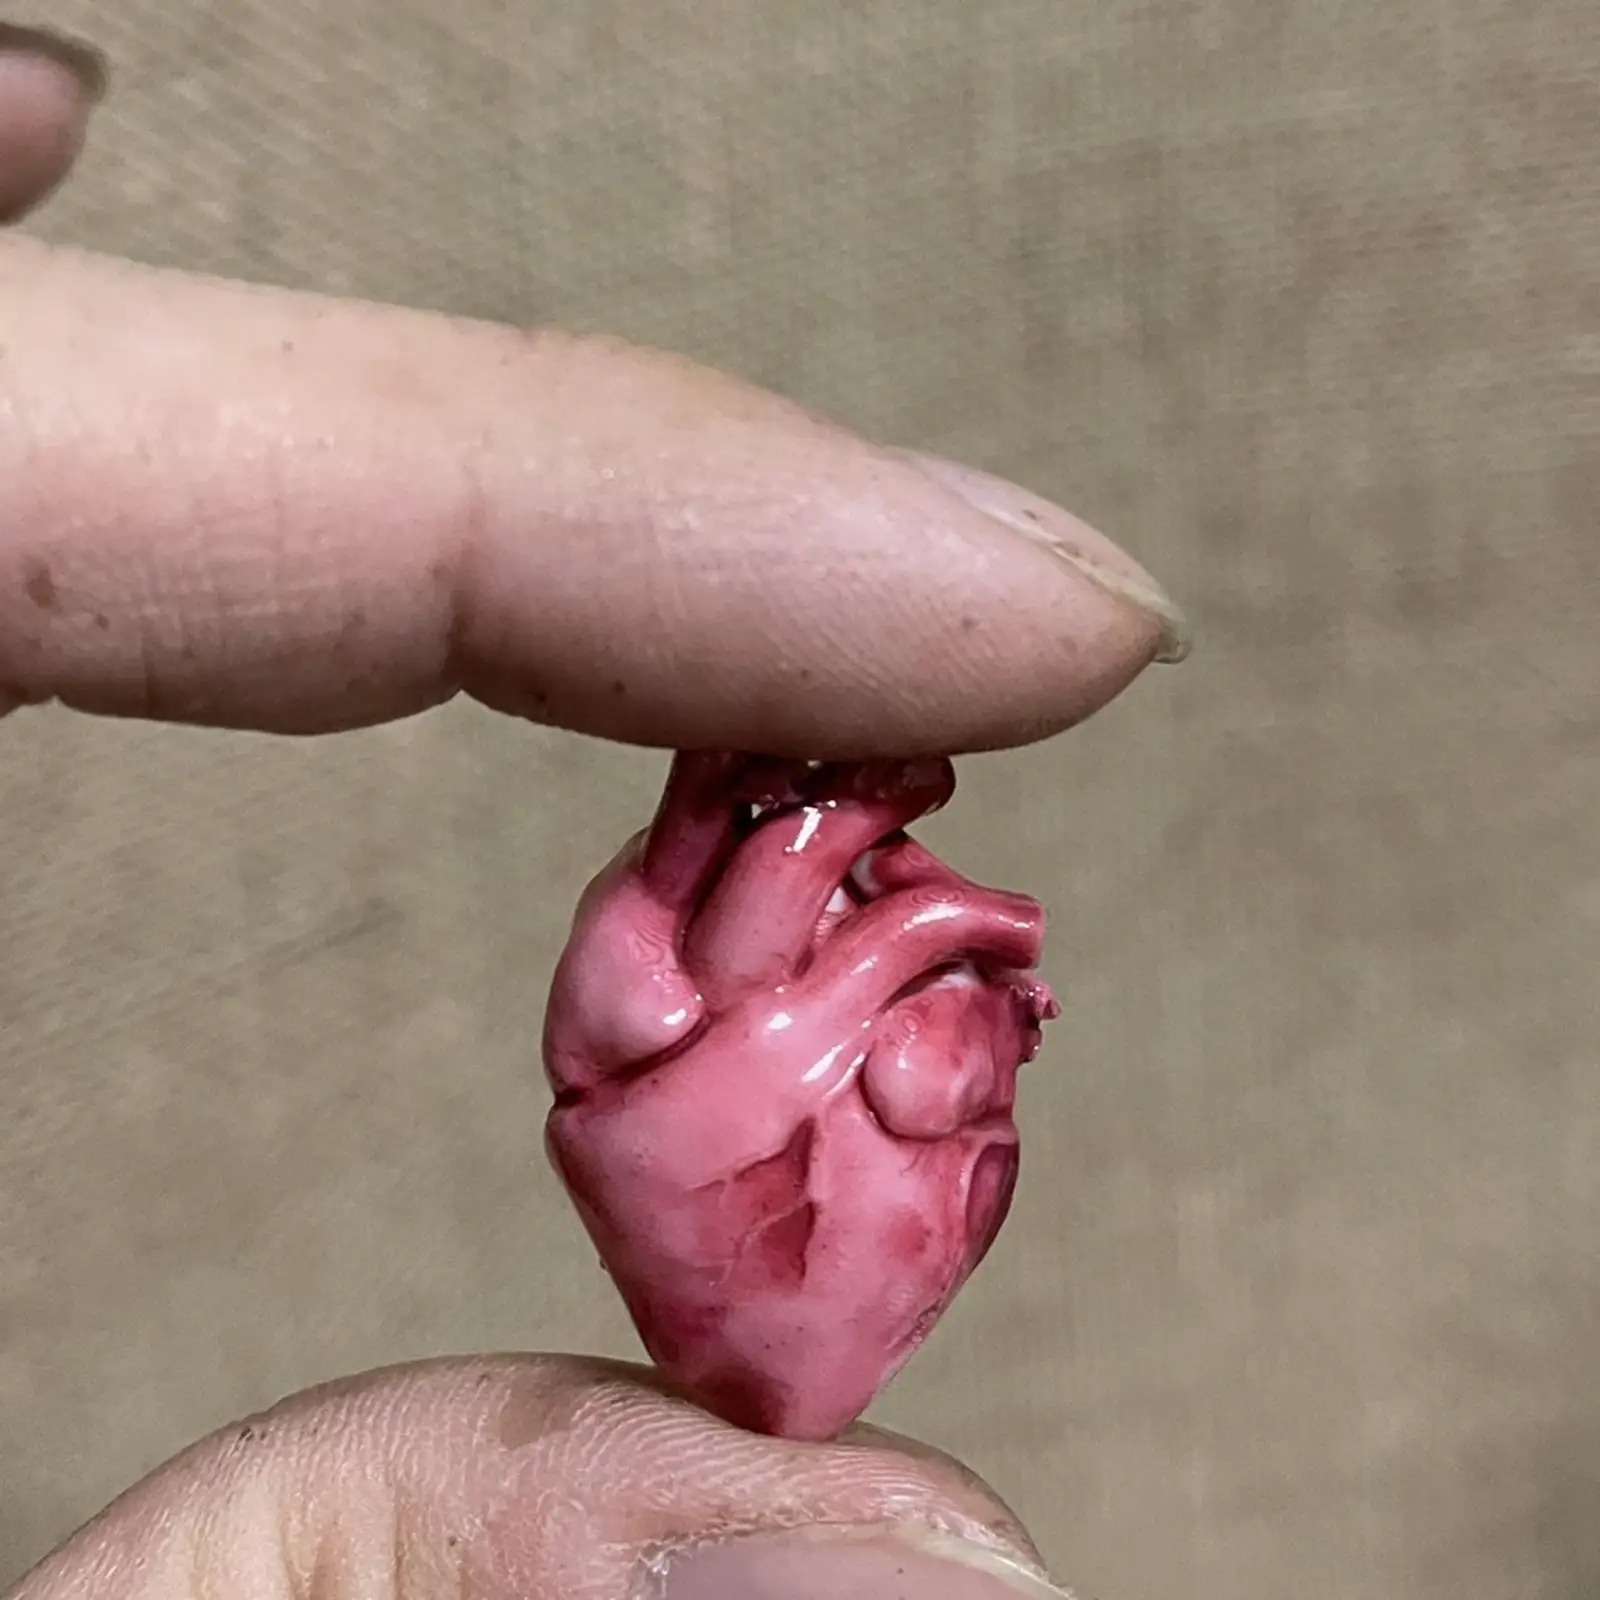 1/18 Heart Model Scene Decoration Photography Prop for 3.75in Action Figures